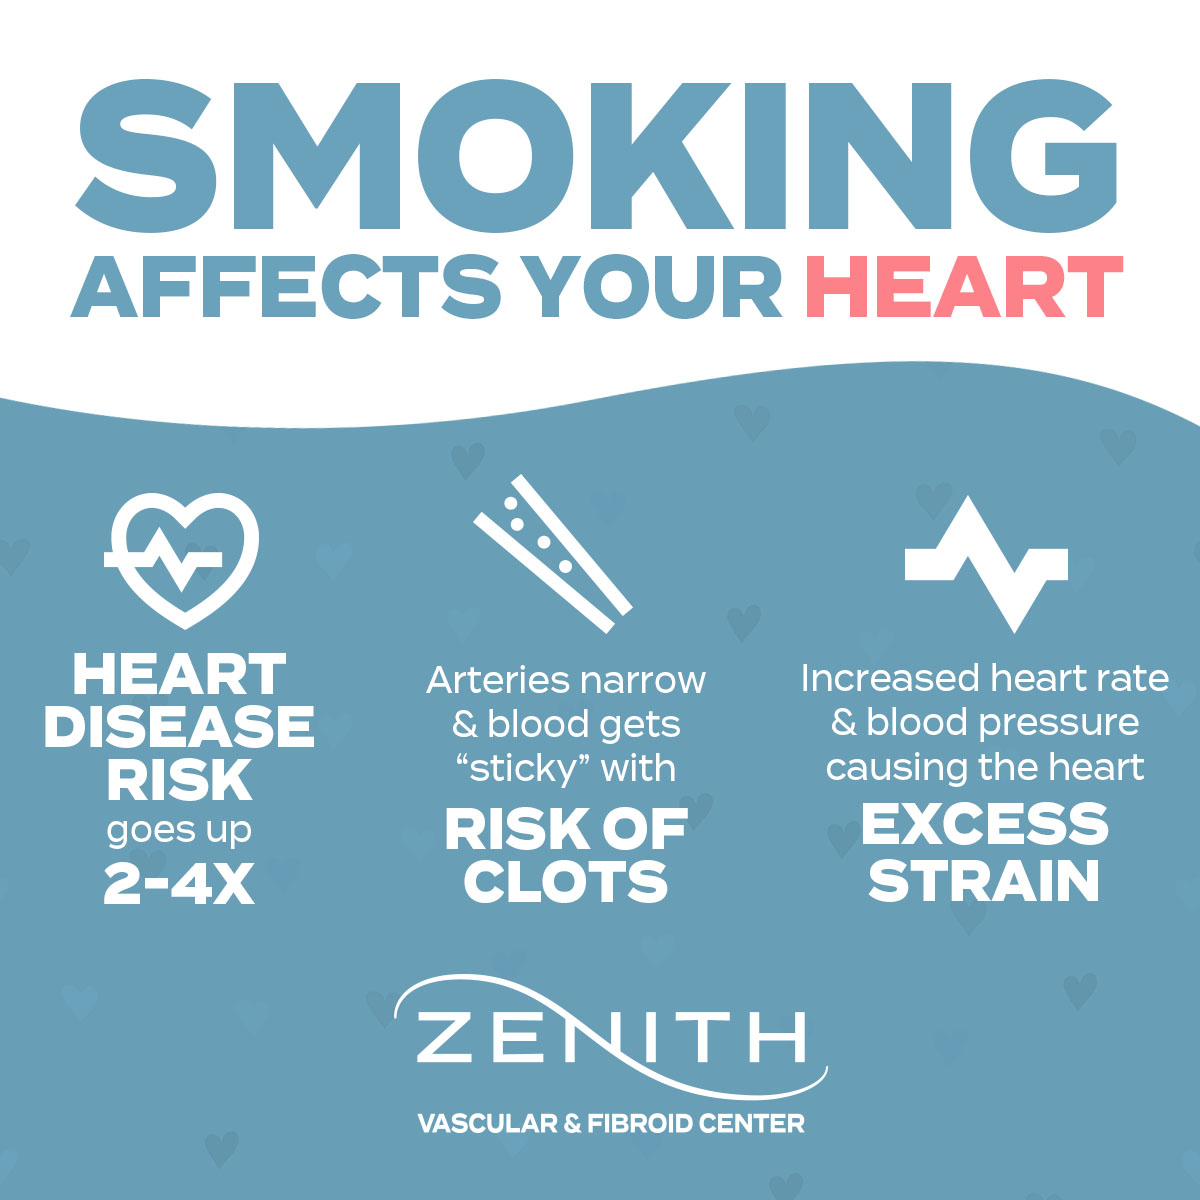 Smoking affects your heart. hear disease risk goes up to 2-4x. risk of clots, excess strain.